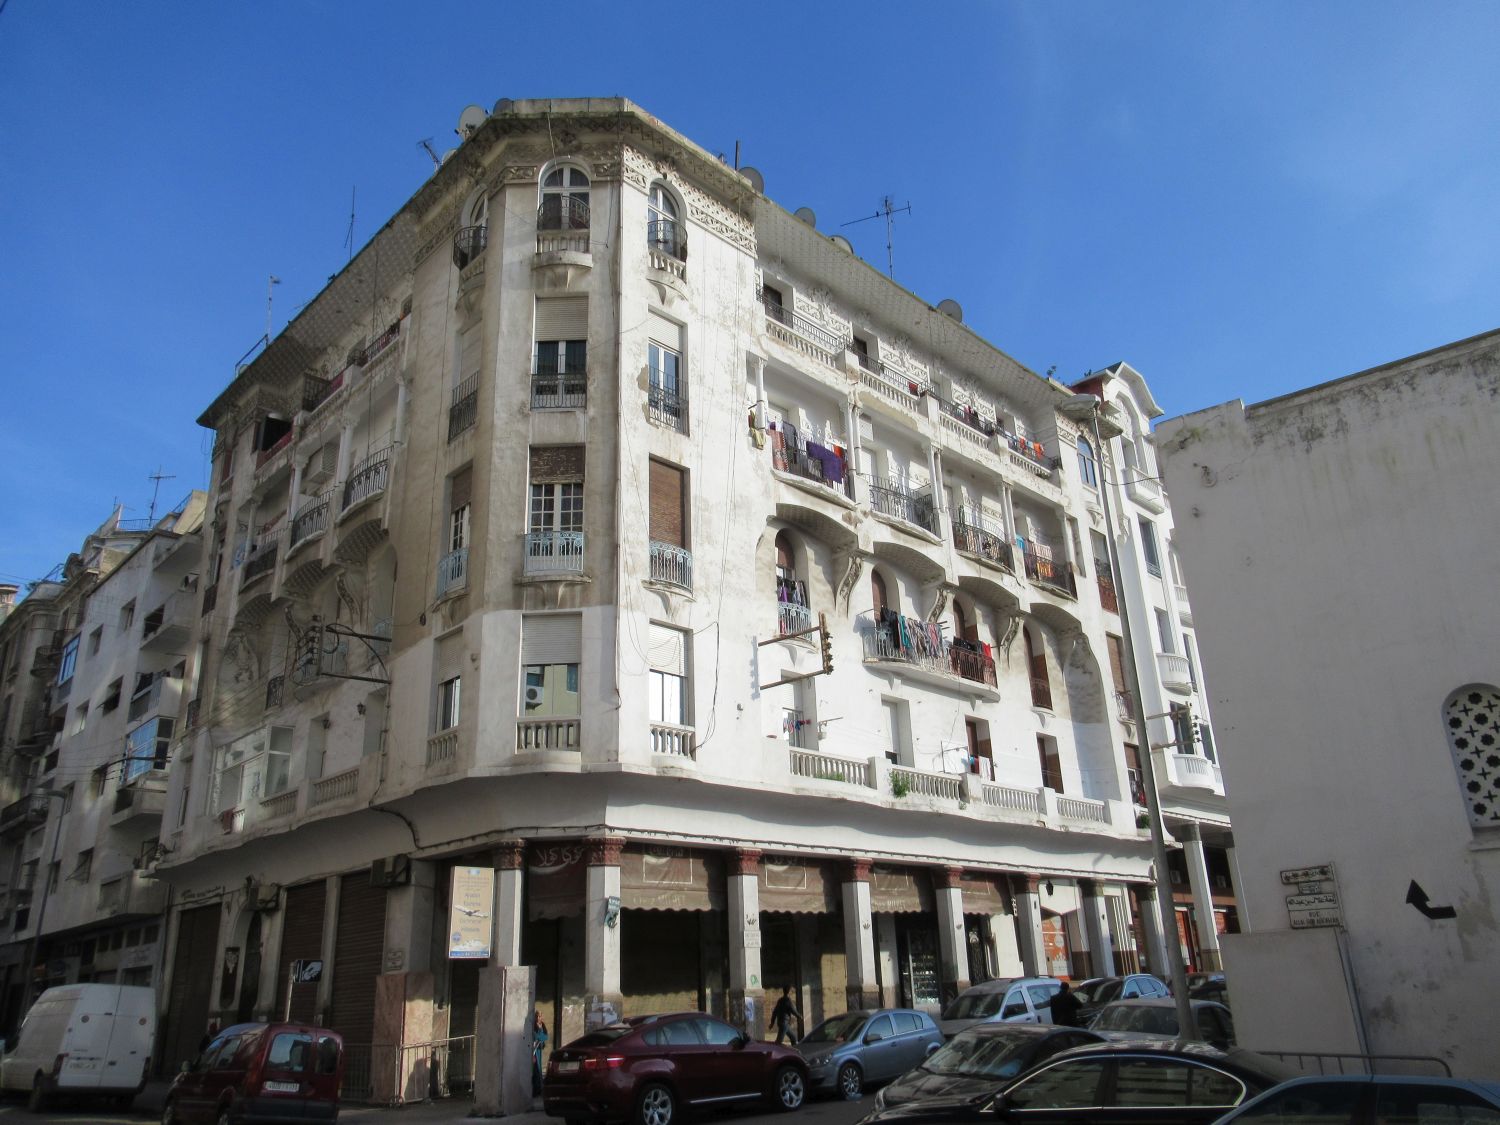 General view of a street, building facade.